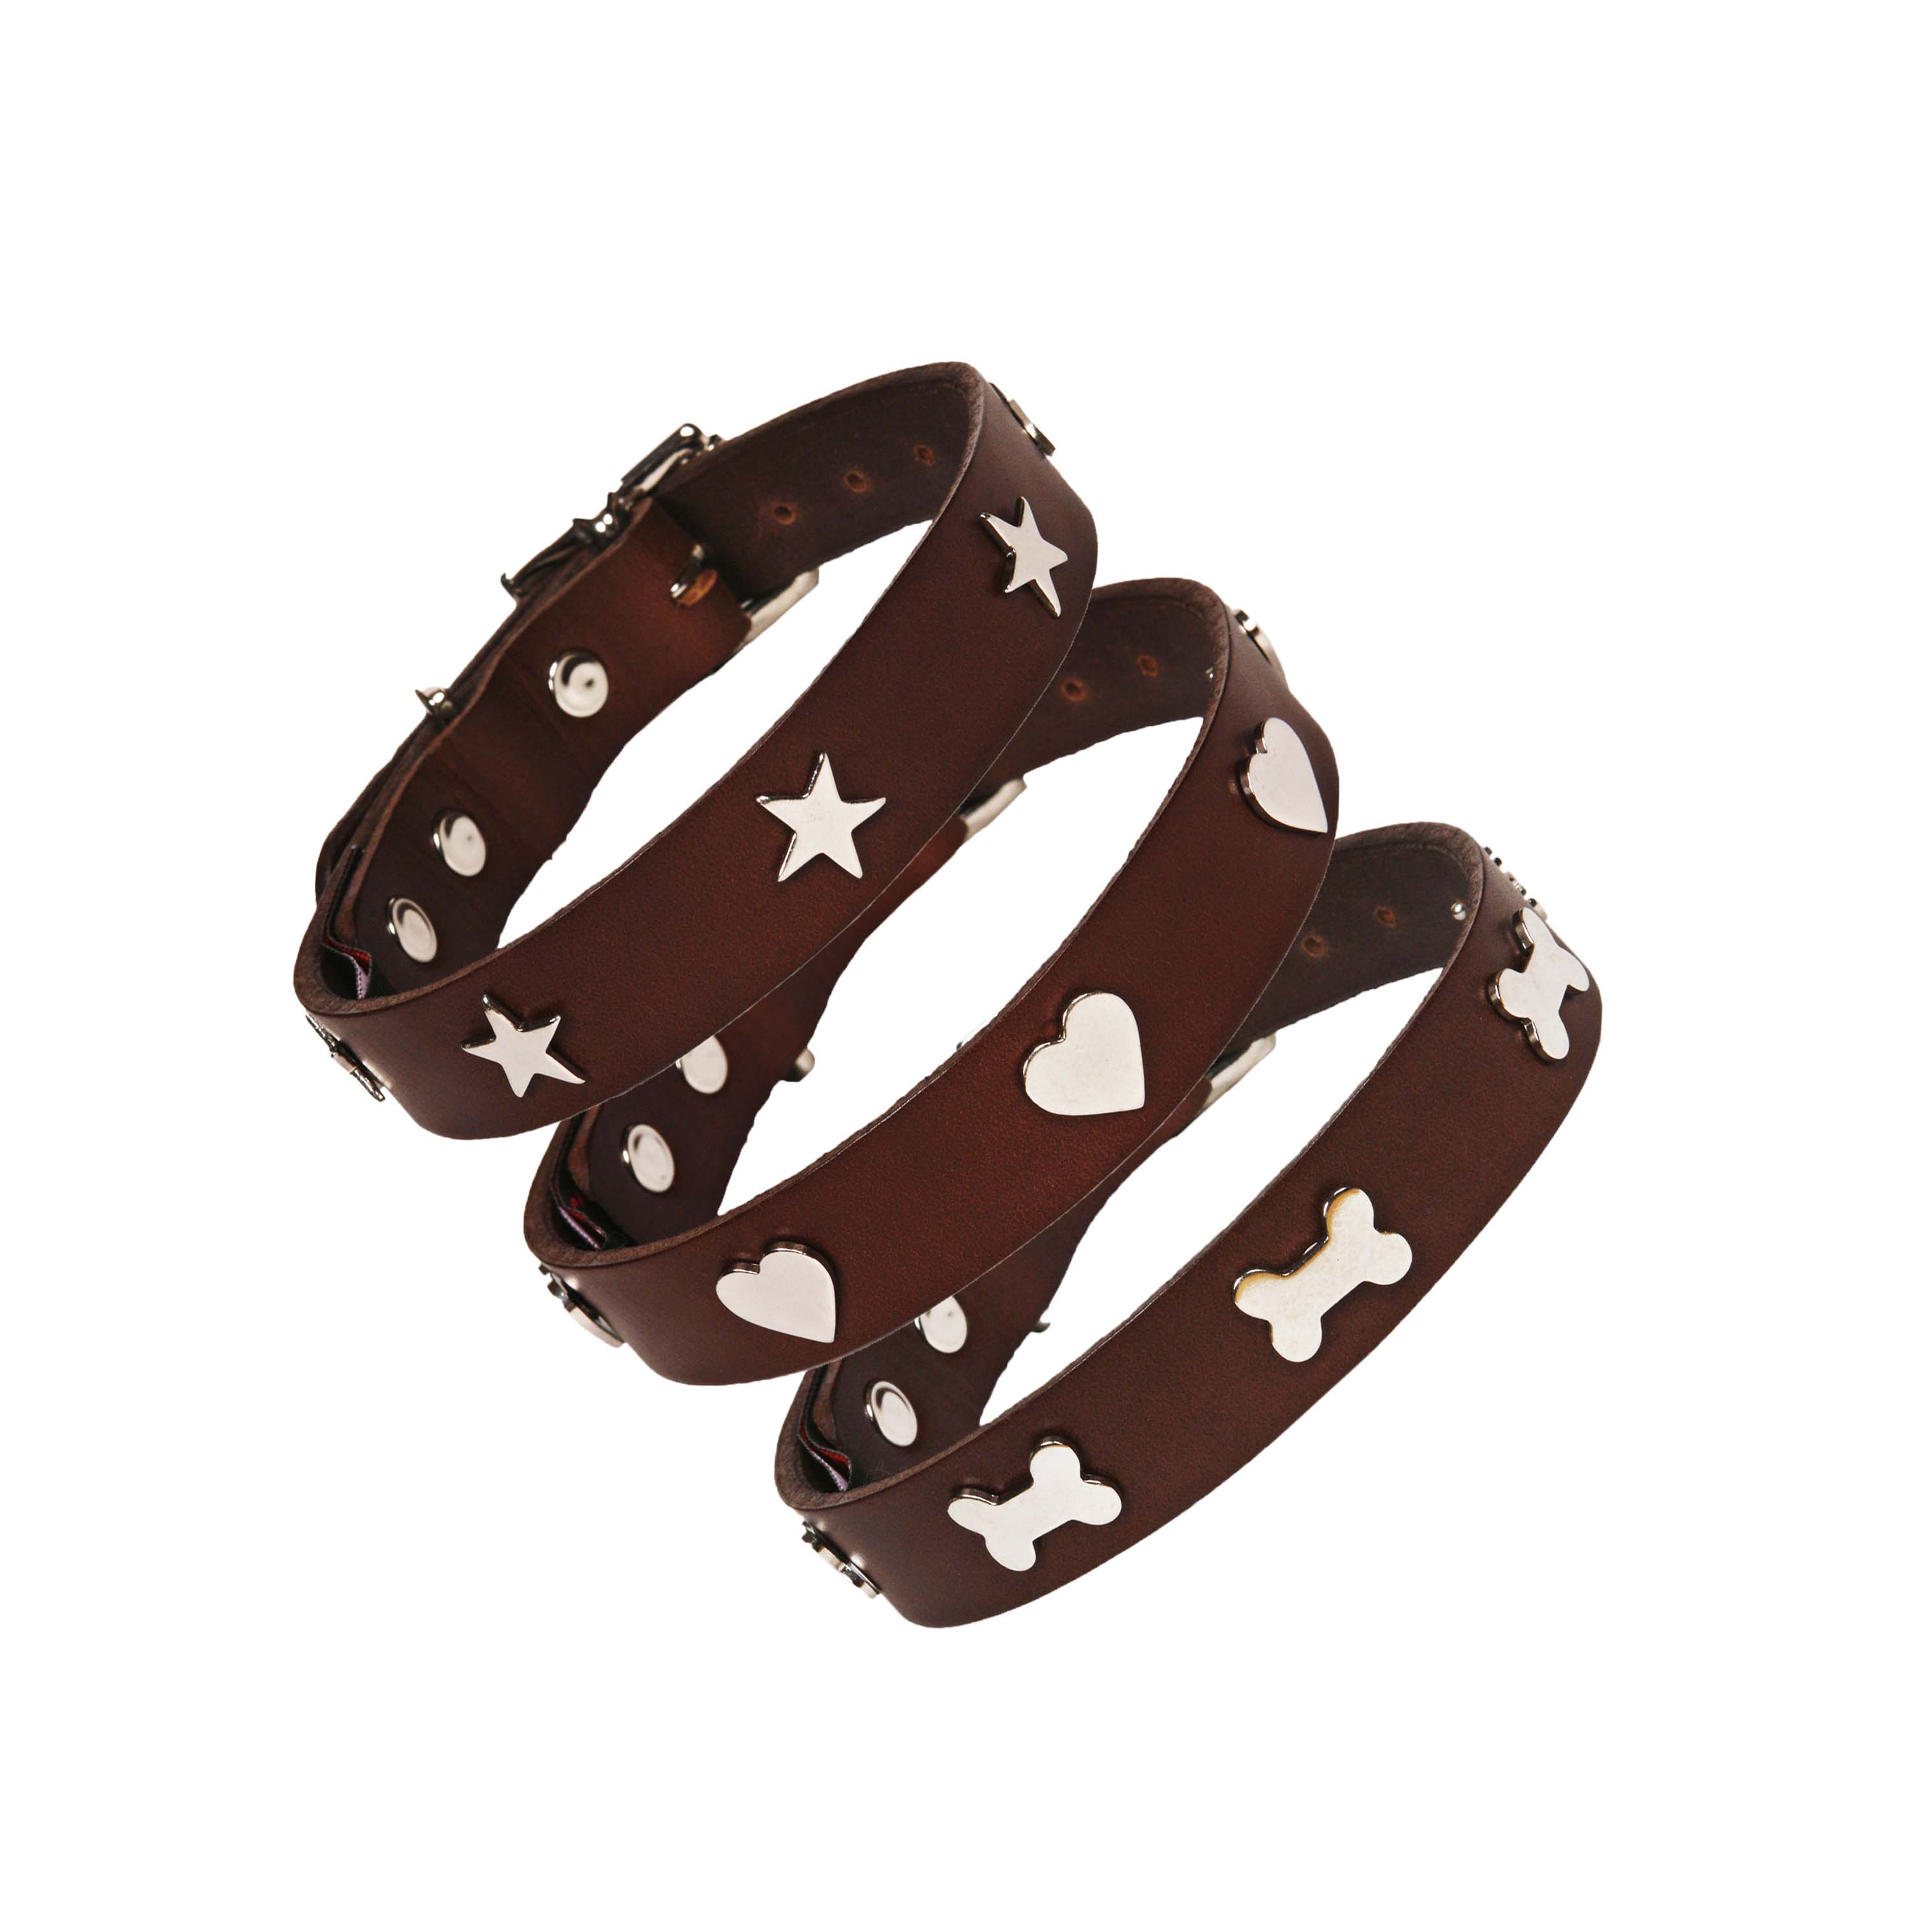 Creature Clothes Brown Leather Dog Collar With Silver Studs